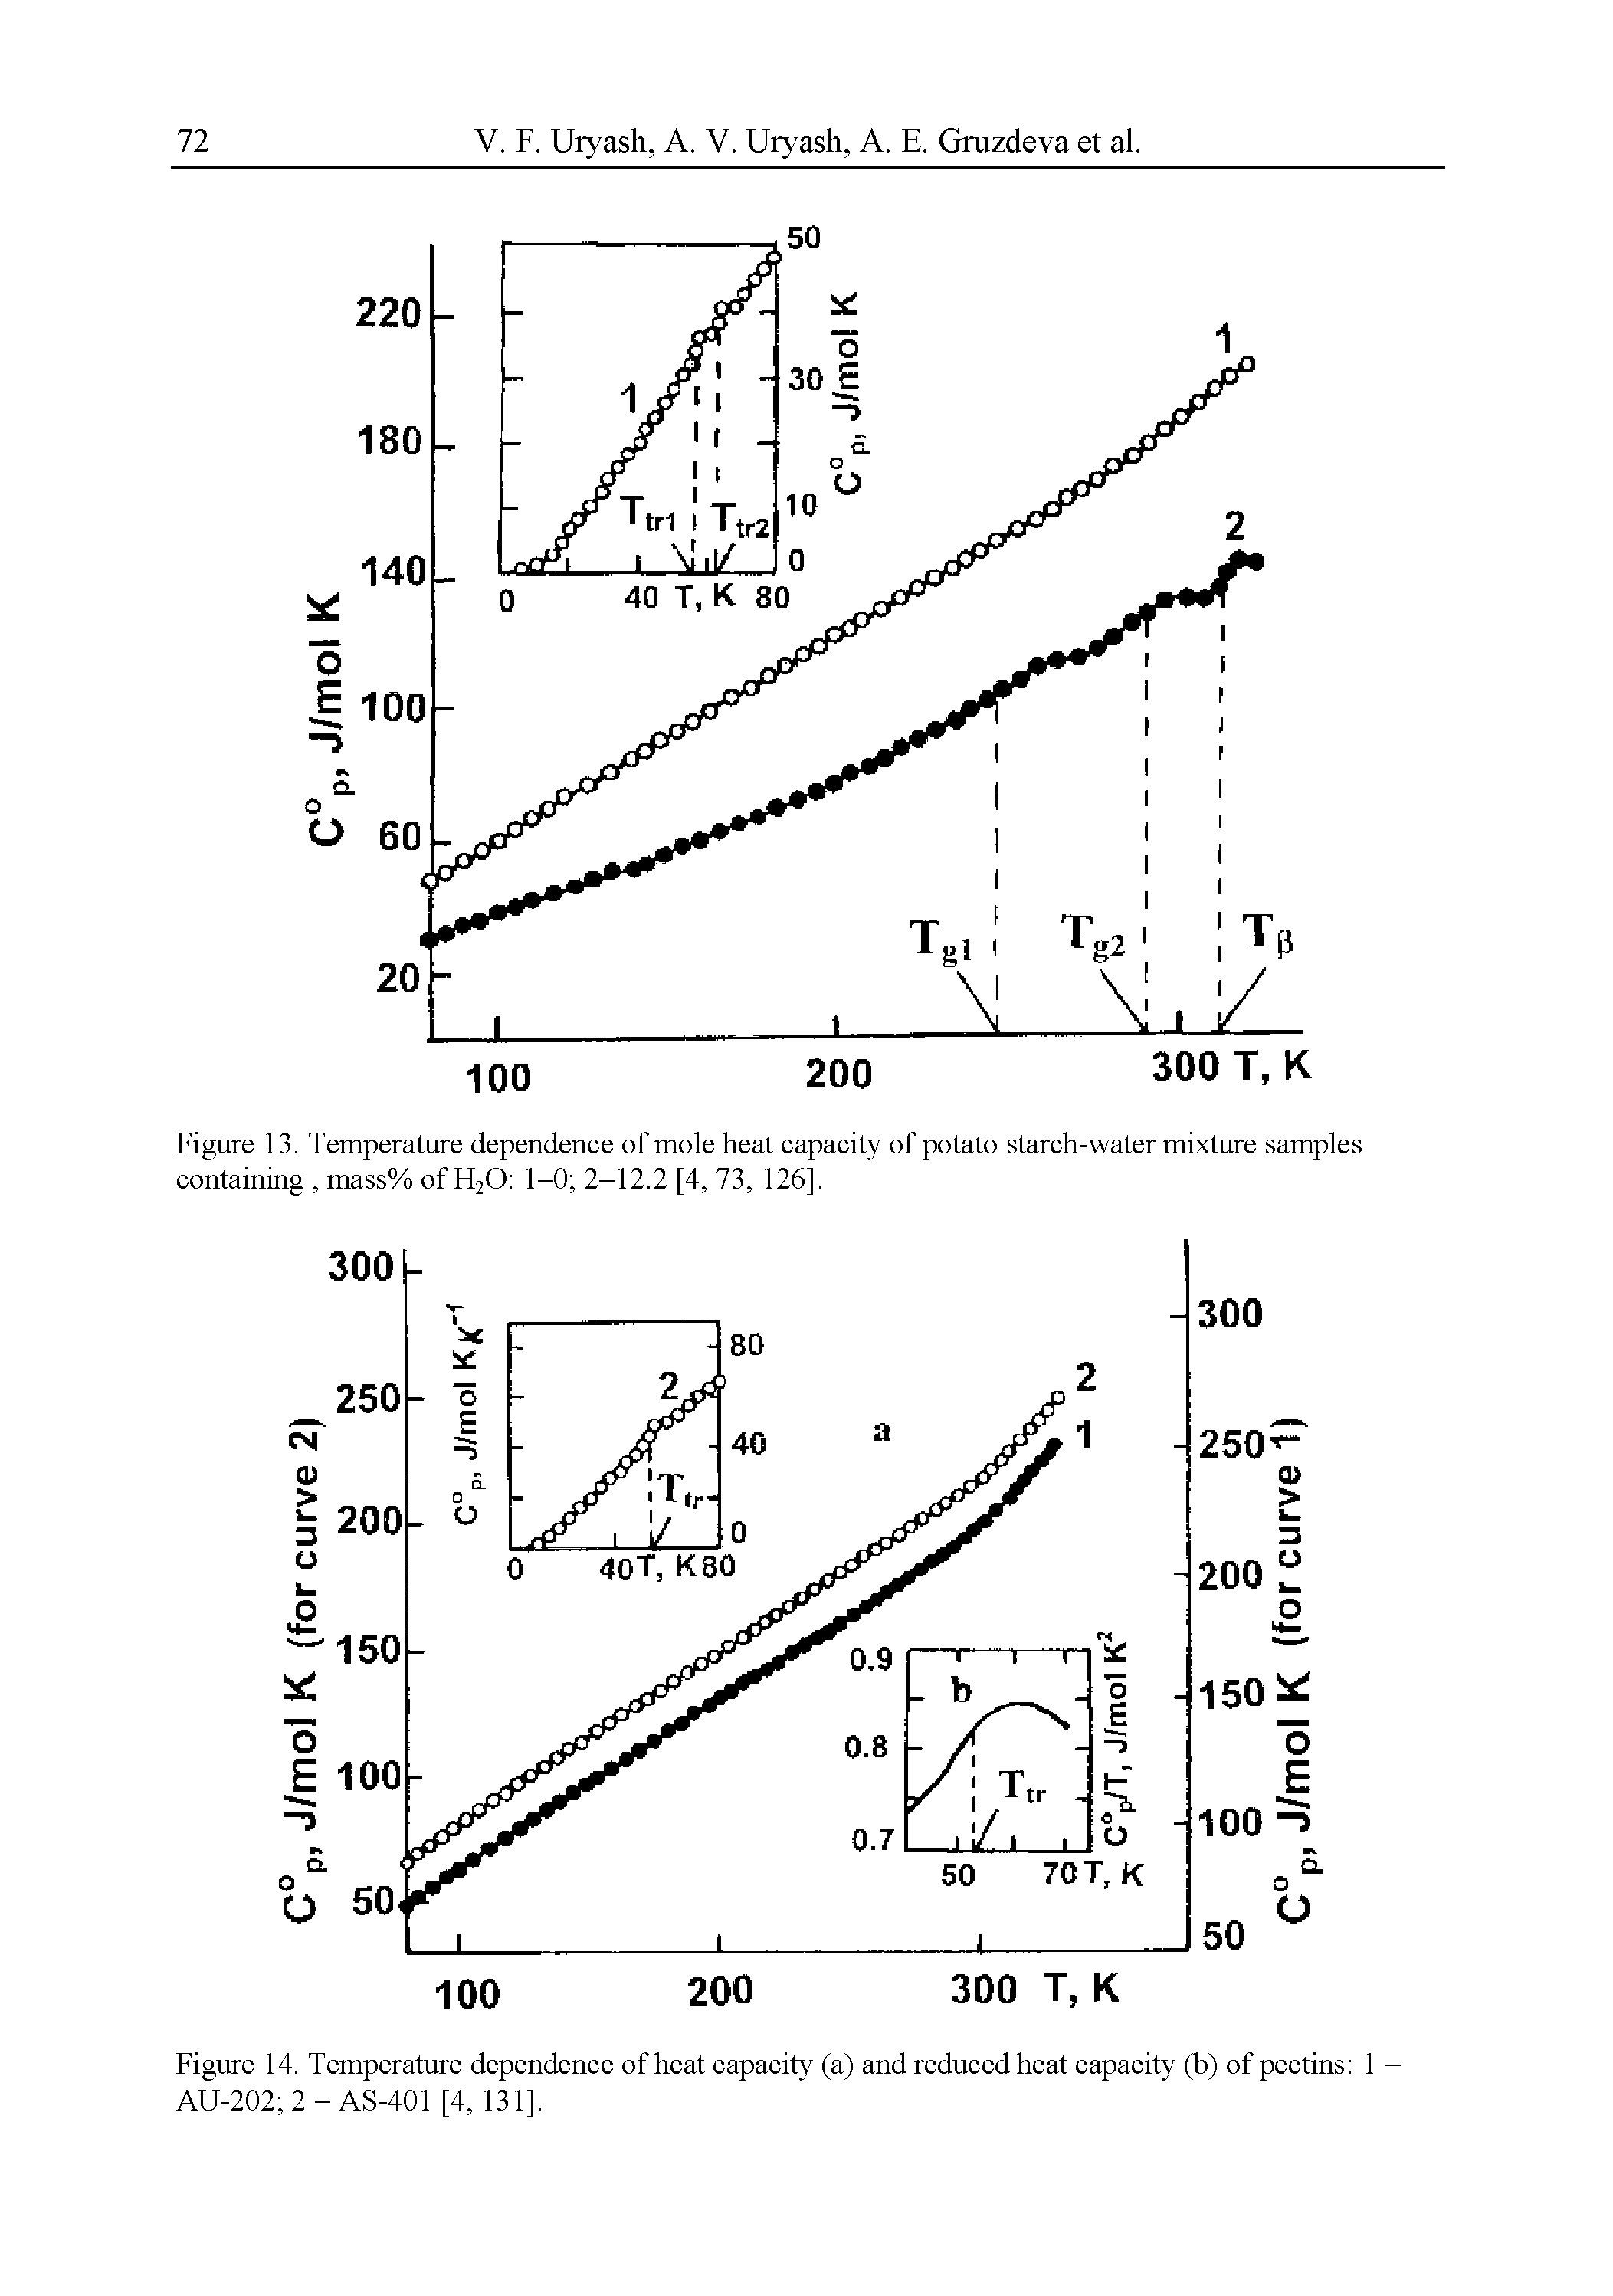 Figure 13. Temperature dependence of mole heat capacity of potato starch-water mixture samples containing, mass% of FI2O 1-0 2-12.2 [4, 73, 126].